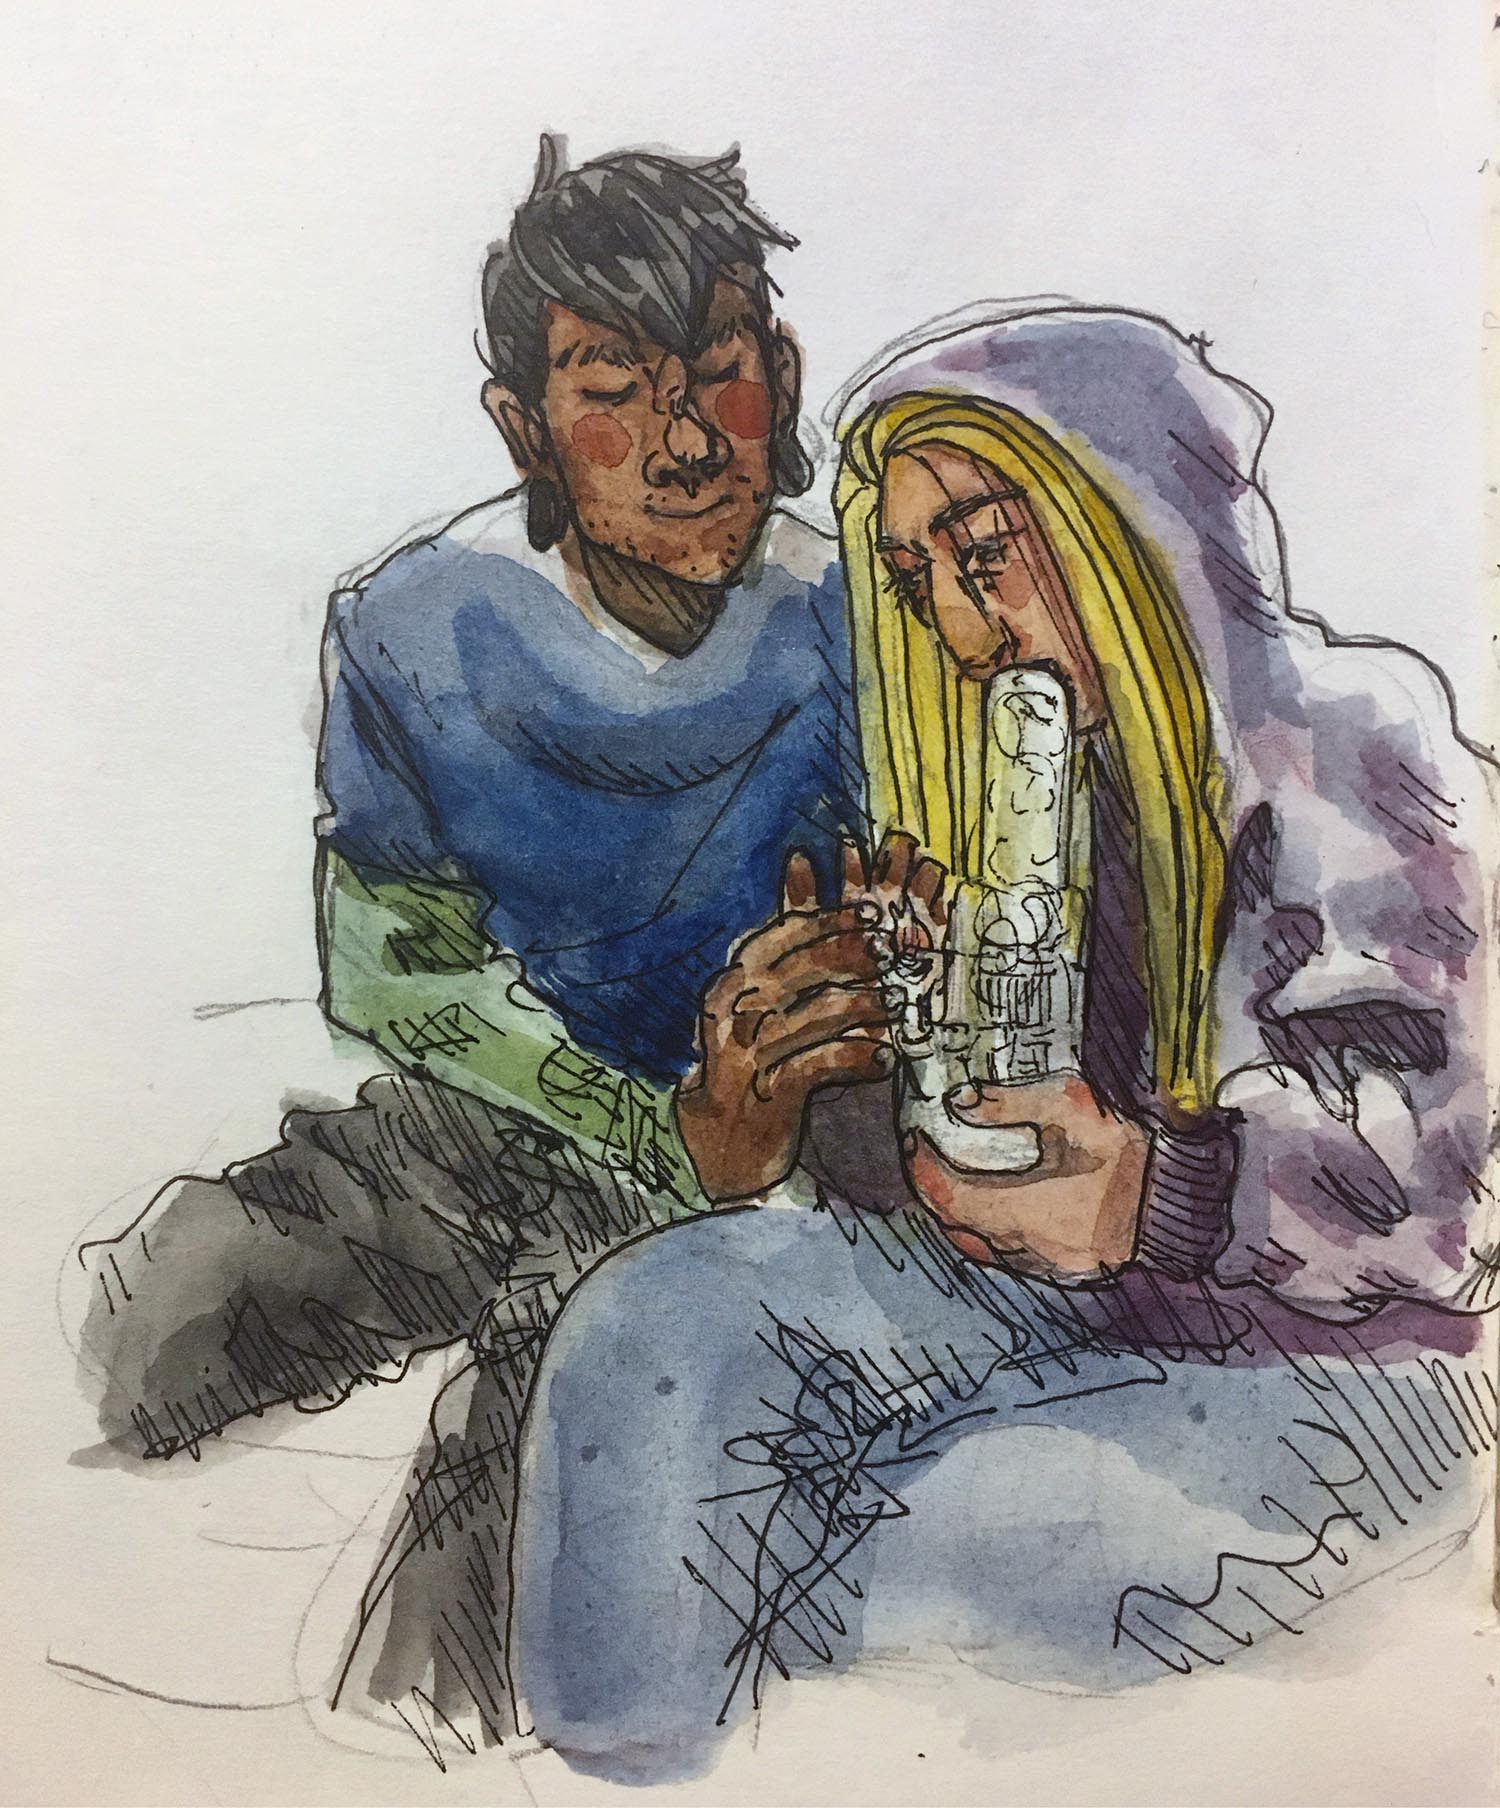 a girl with long blonde hair (jordan) in a purple hoodie smokes from a large bong, as a boy with a mohawk (isaac), wearing a blue shirt and green long-sleeves undershirt, protects the flame with his hands.